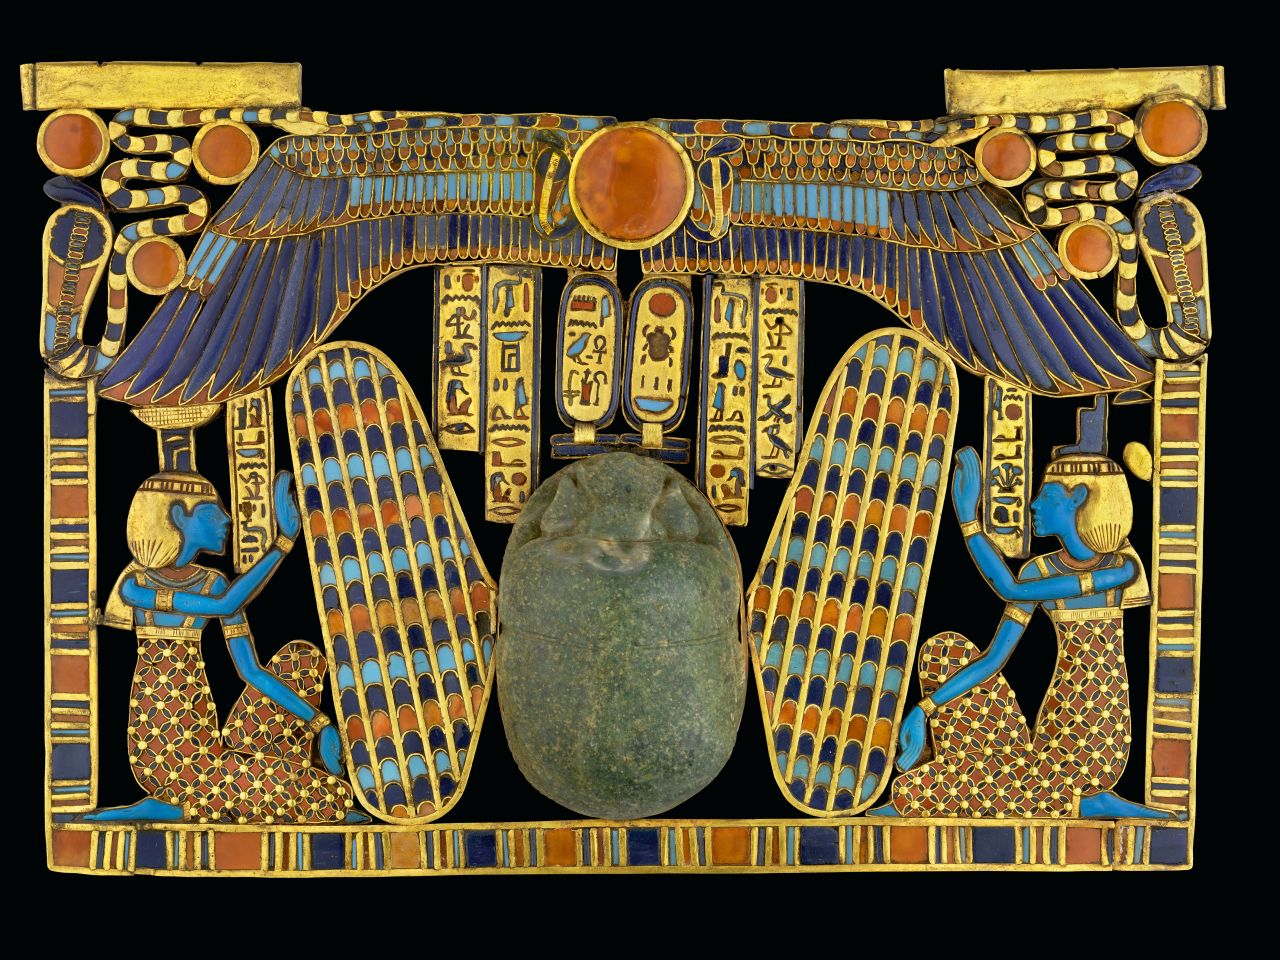 Sandro Vannini has been photographing the Valley of Kings in Egypt for over two decades. He used breakthroughs in technology to capture this ancient civilization in remarkable detail. <br /><br />This image shows the decoration of a large funerary scarab made from green semiprecious stone.